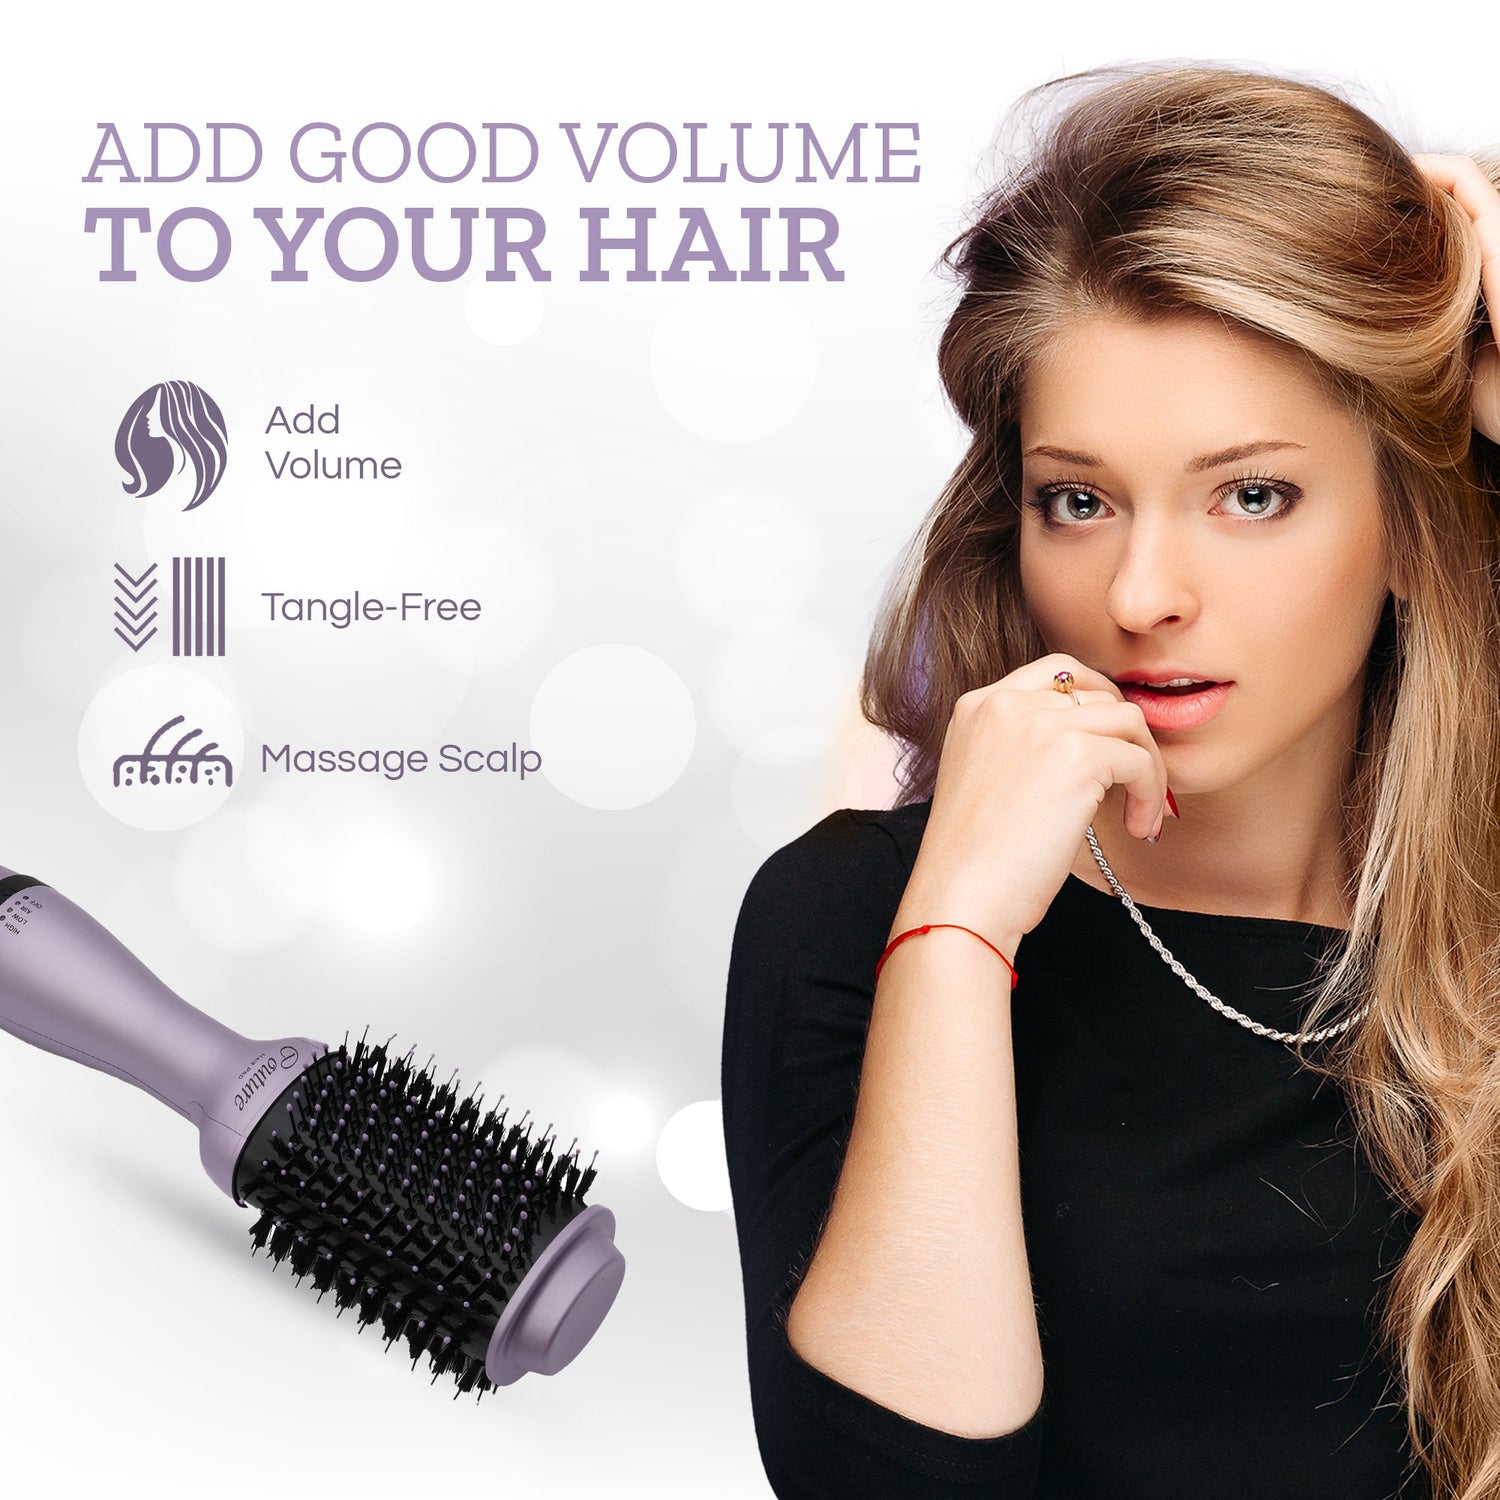 Couture Hair Pro Hot Air Brush - 3 in 1 Hair Straightening Brush, Volumizer & Dryer - Lavender - Couture Hair Pro